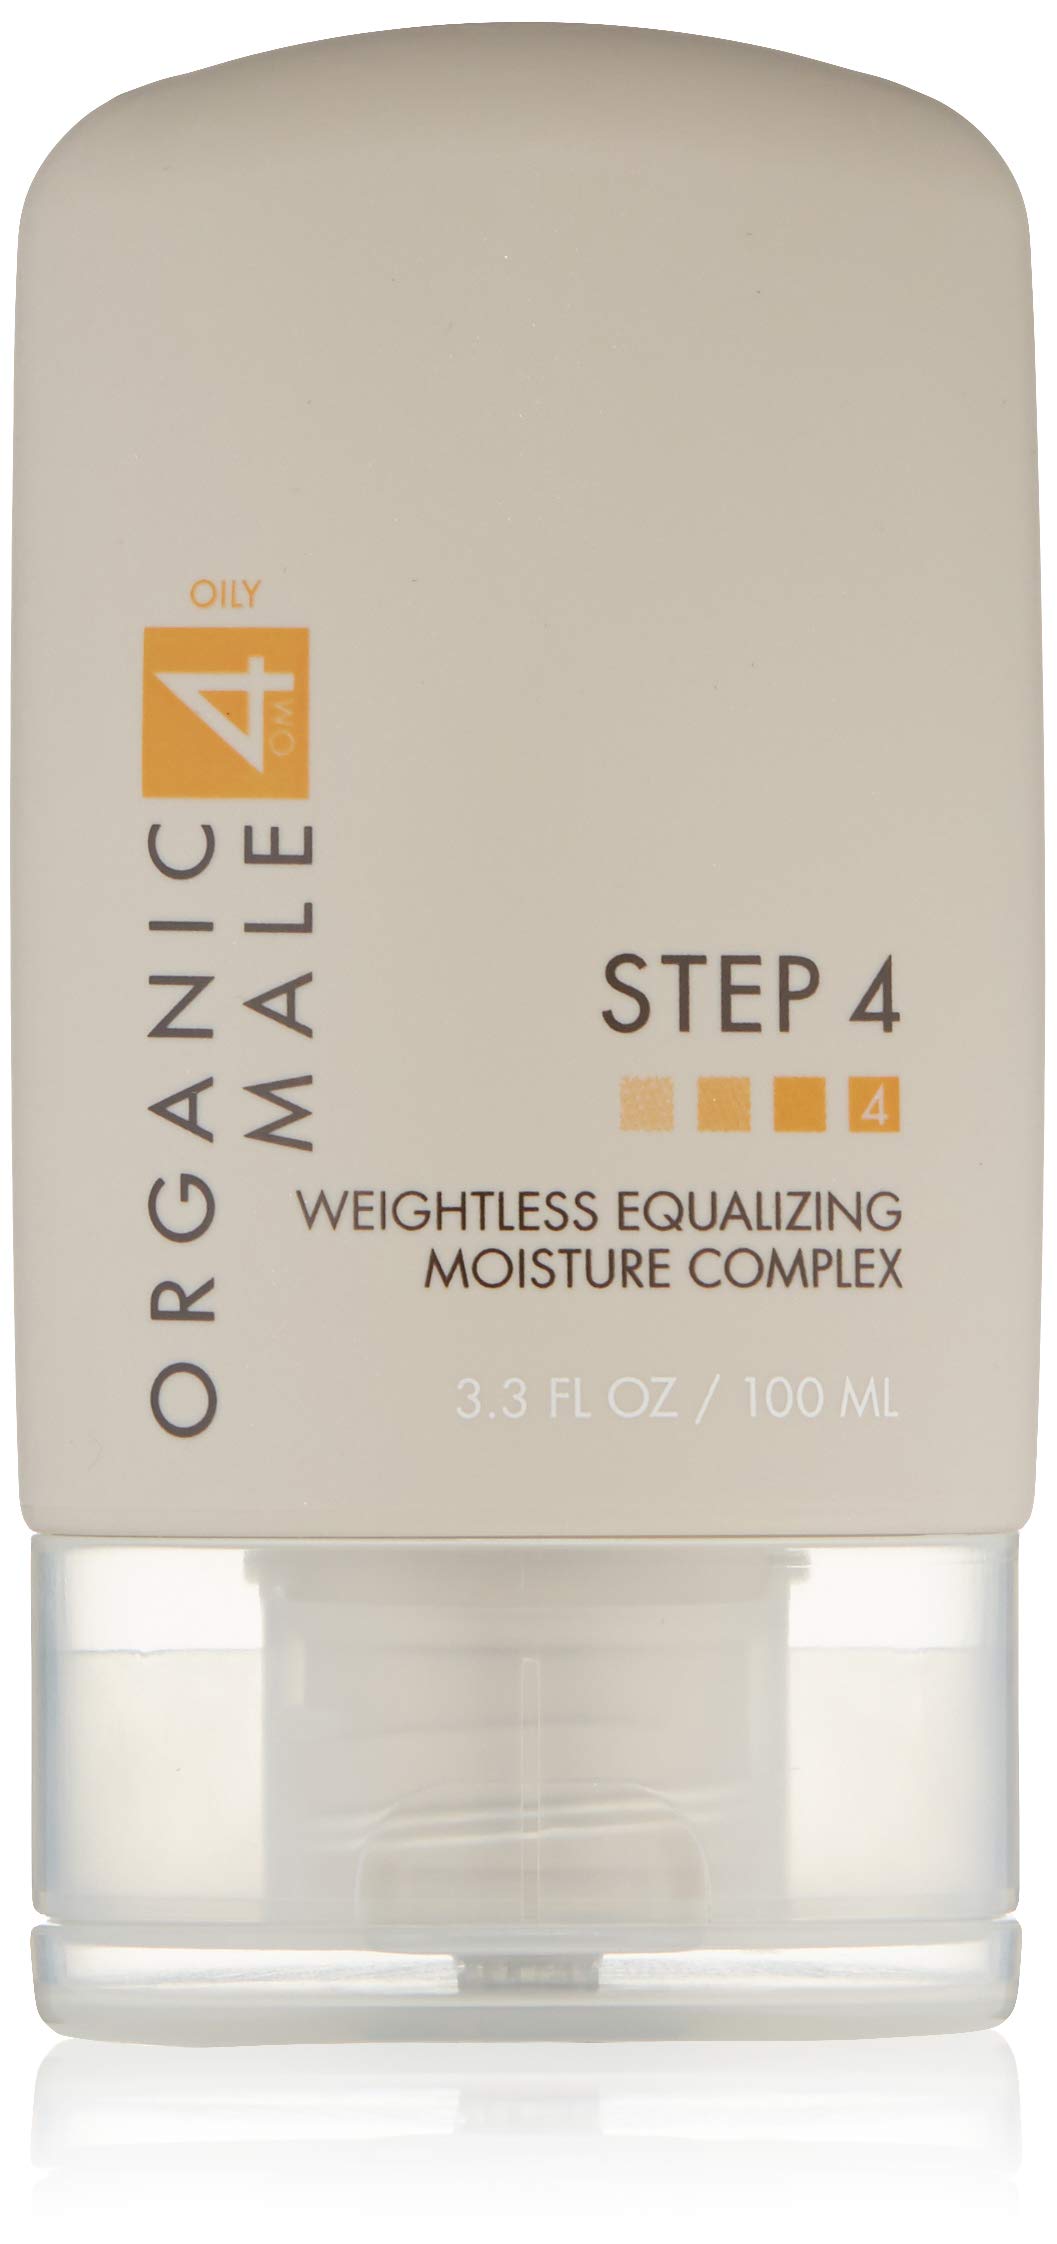 Organic Male OM4 Oily STEP 4: Weightless Equalizing Moisture Complex - 3.3 oz